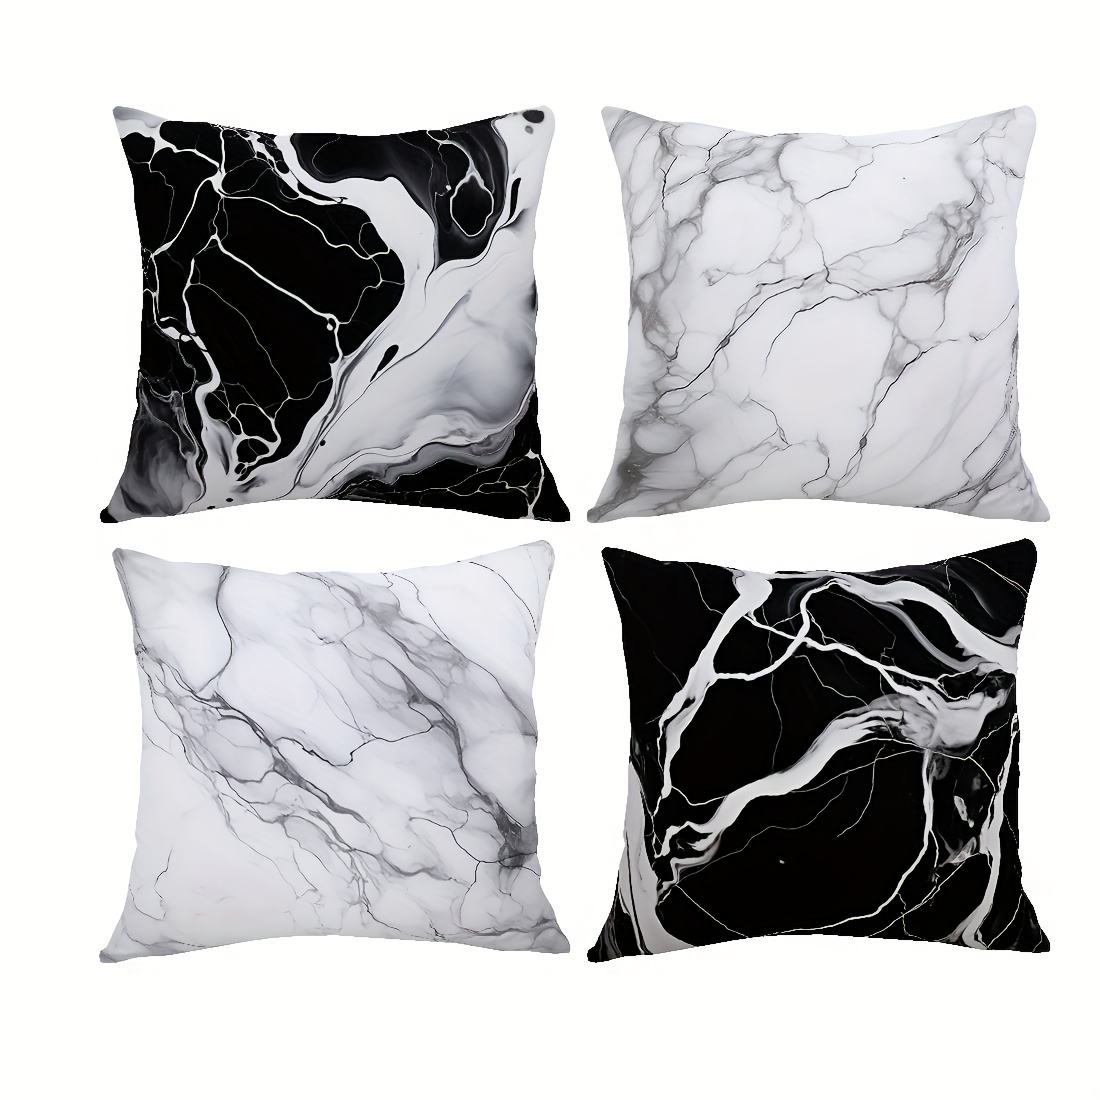 

1pc 45x45cm Sofa Chair Decorative Pillowcase 100% Polyester Peach Skin Double-sided Black And White Marble Printed Cushion Cover Pillowcase Home Decoration